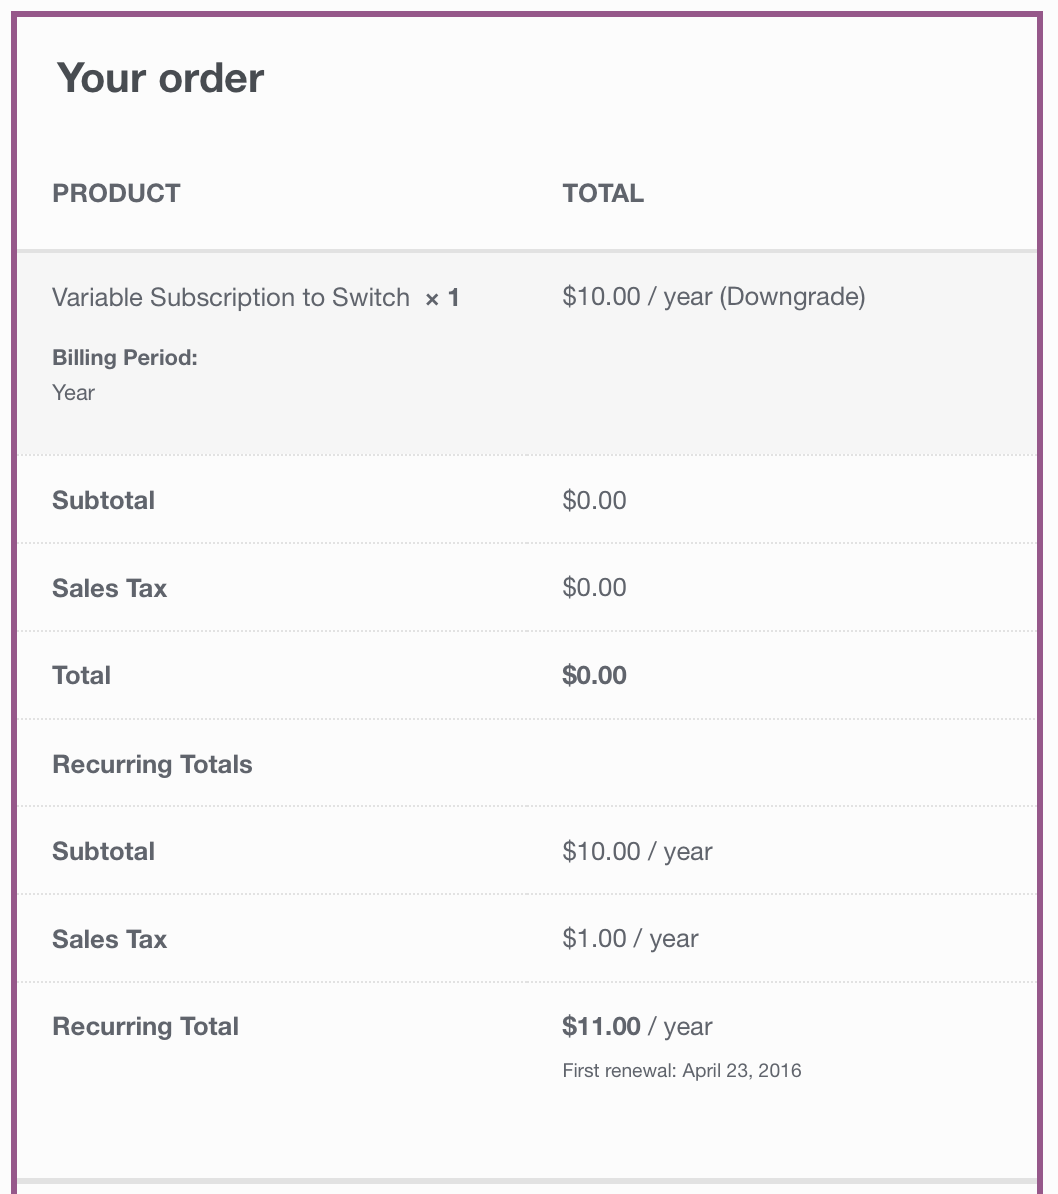 Subscription Downgrade Order Totals on Checkout